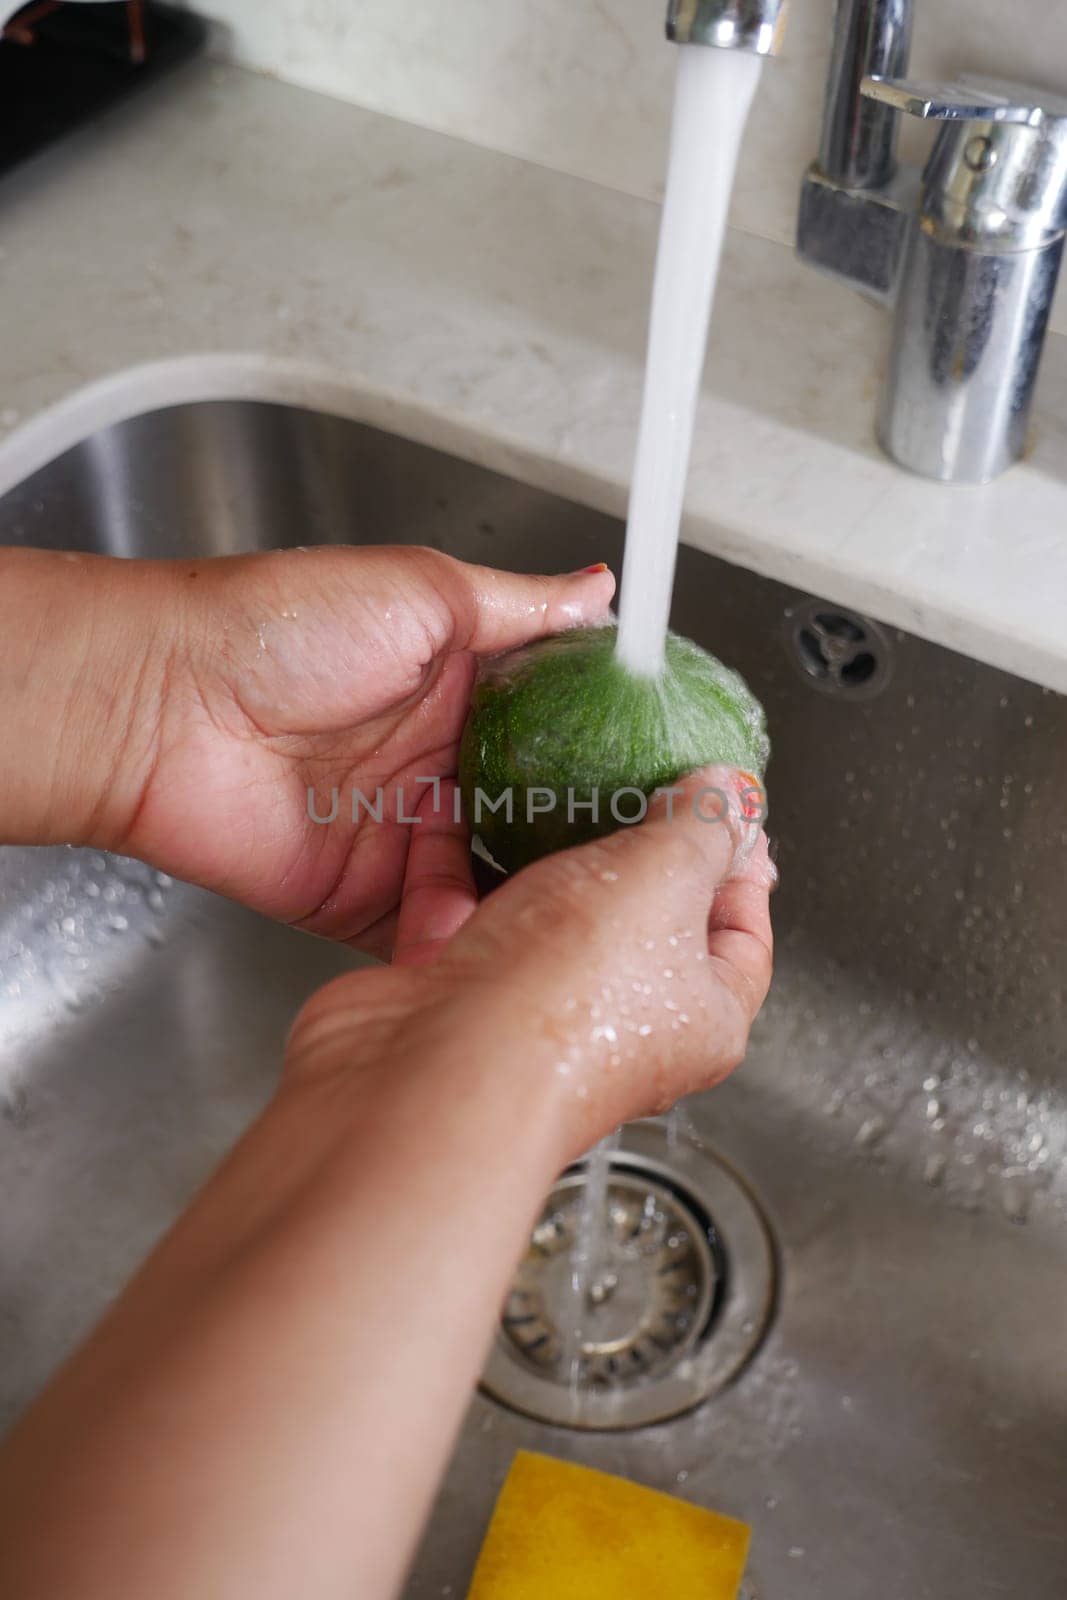 hand washing avocado with water sprinkling.